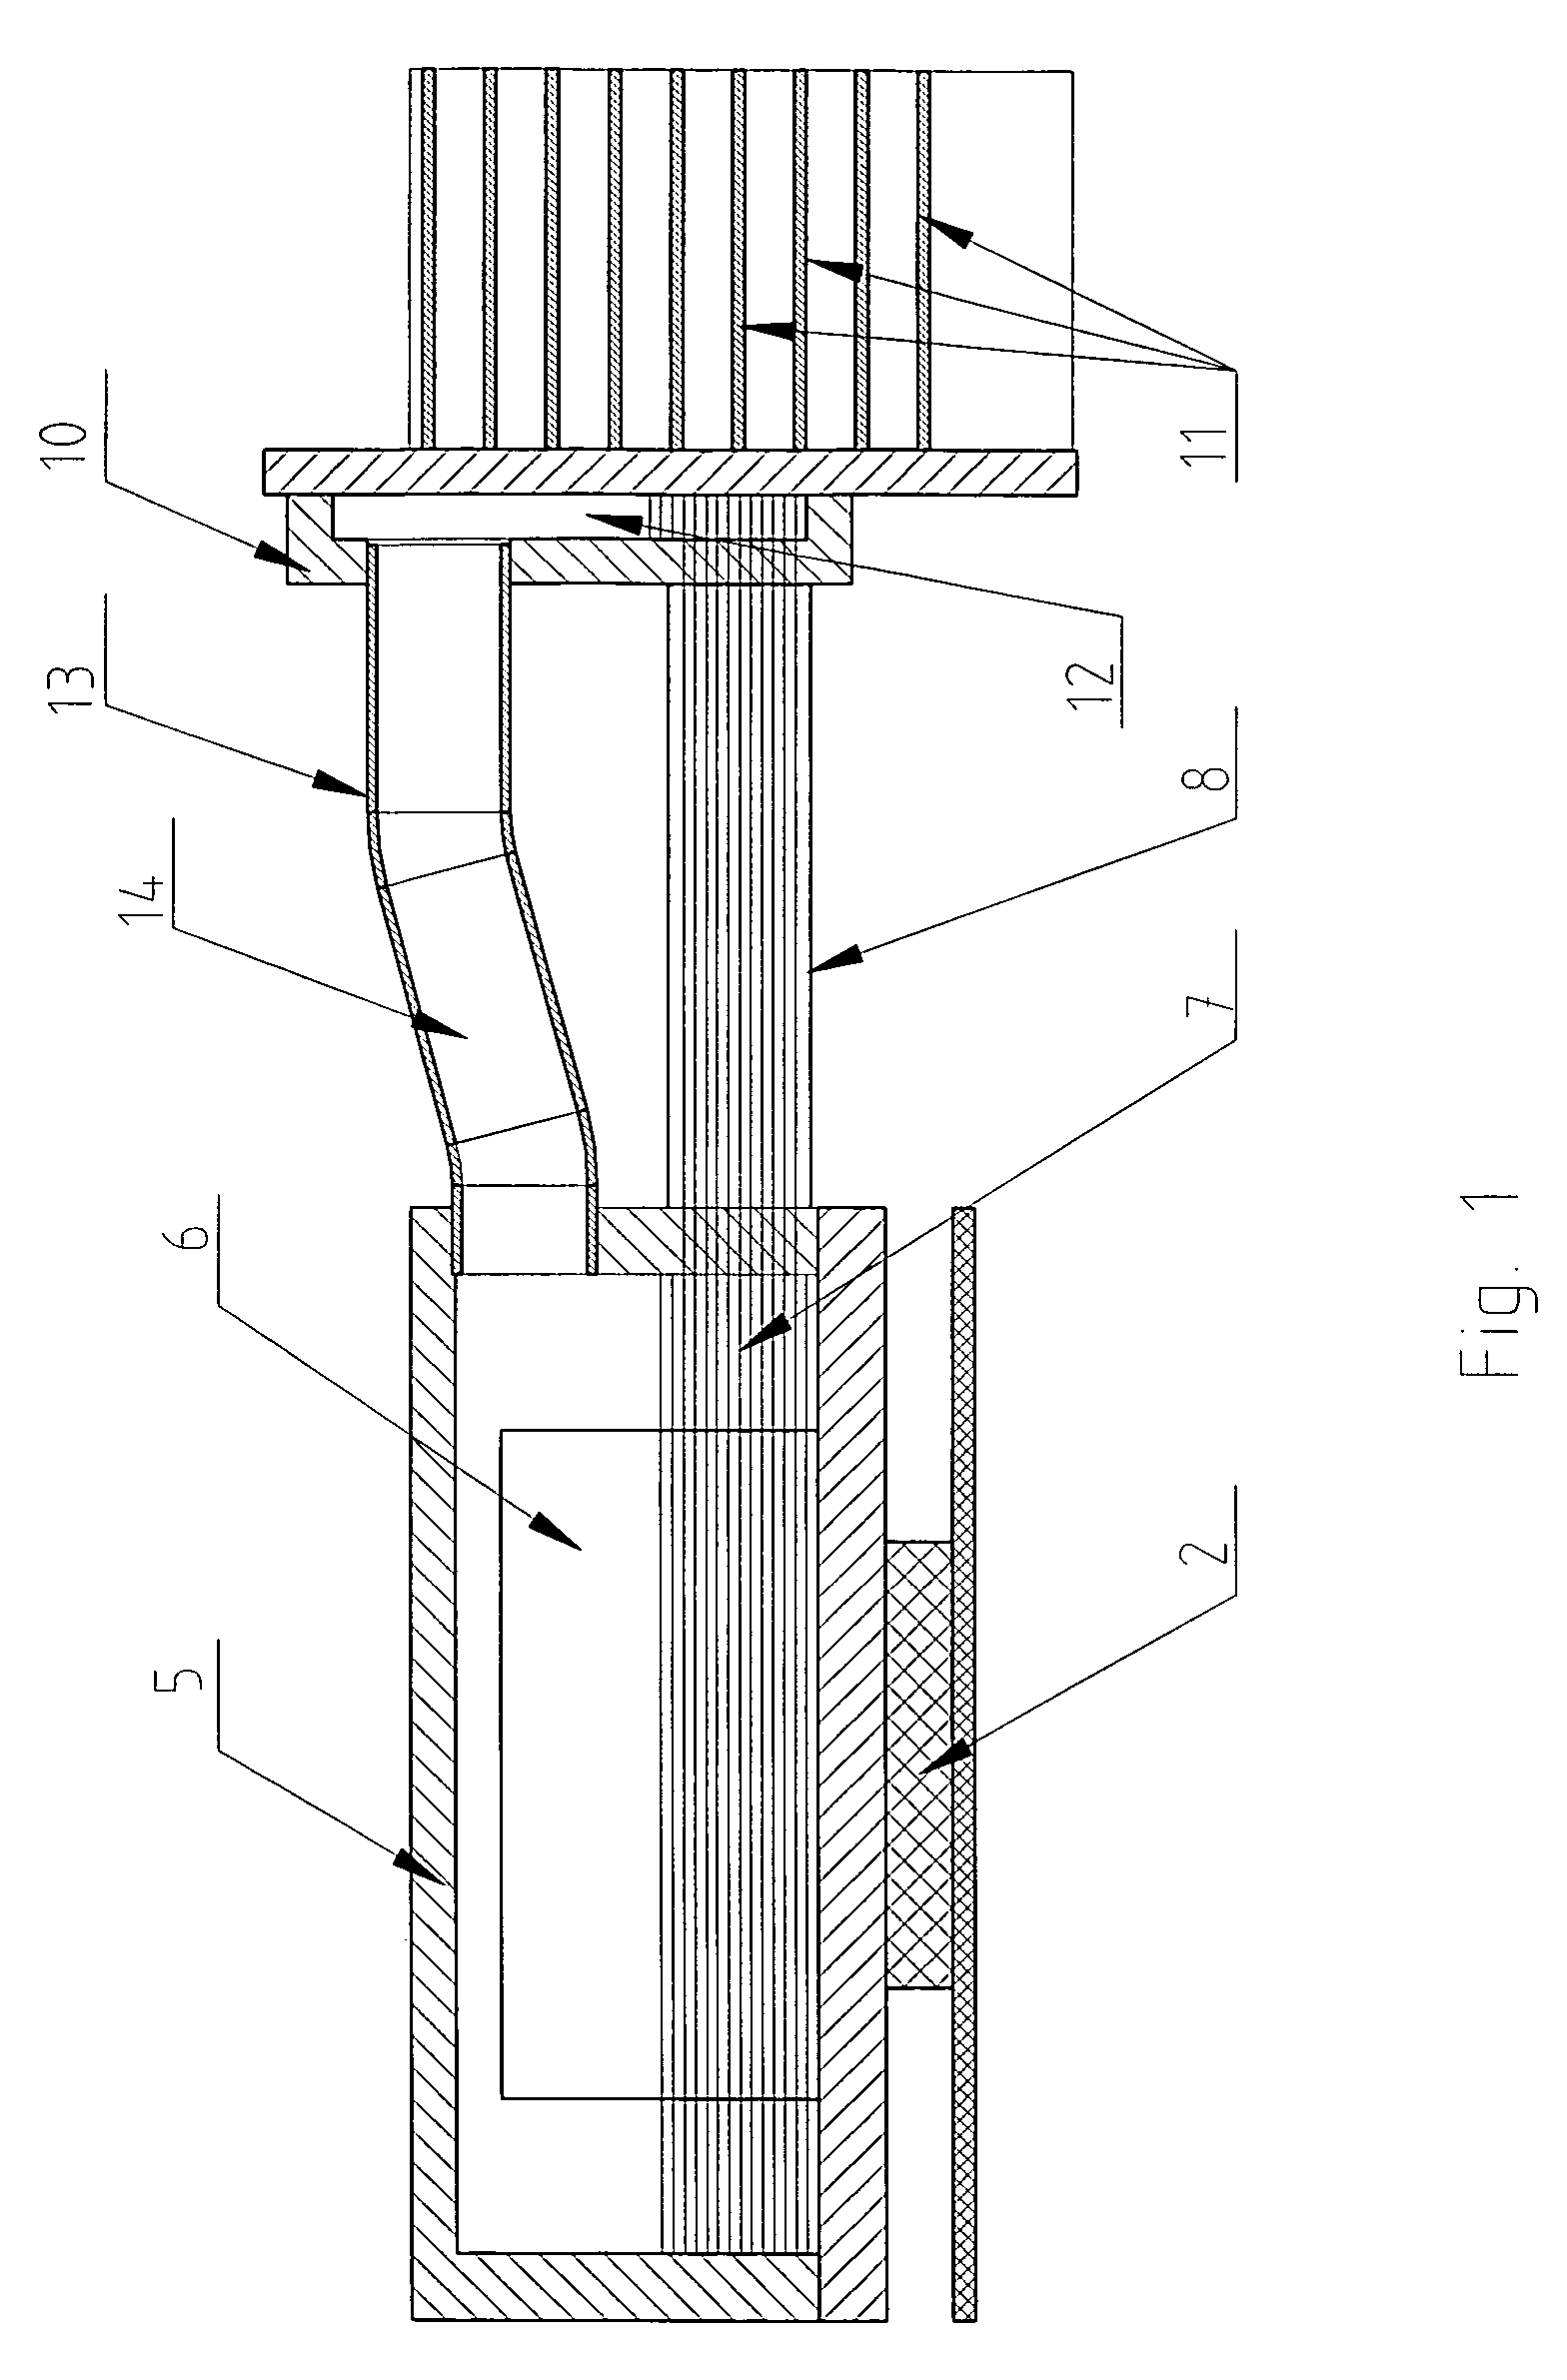 Low-profile thermosyphon-based cooling system for computers and other electronic devices